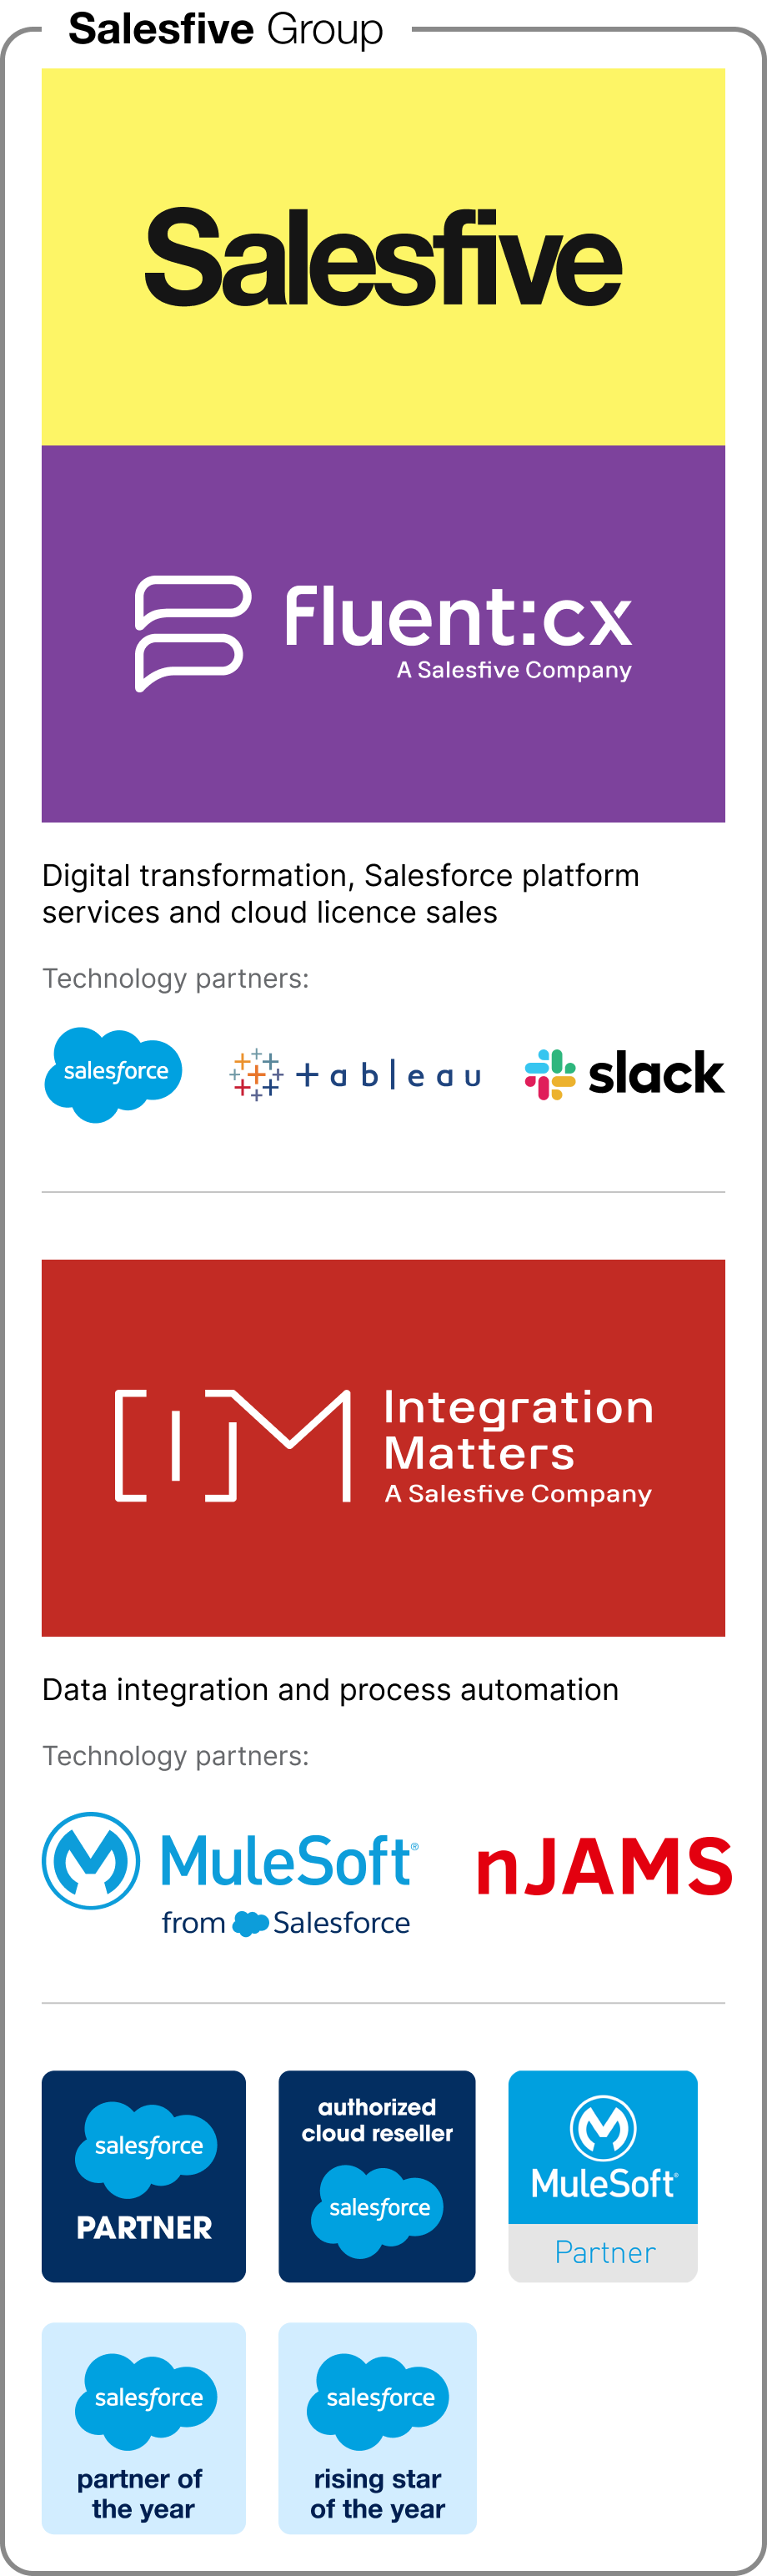 Performance overview Salesfive fluent:cx and Integration Matters